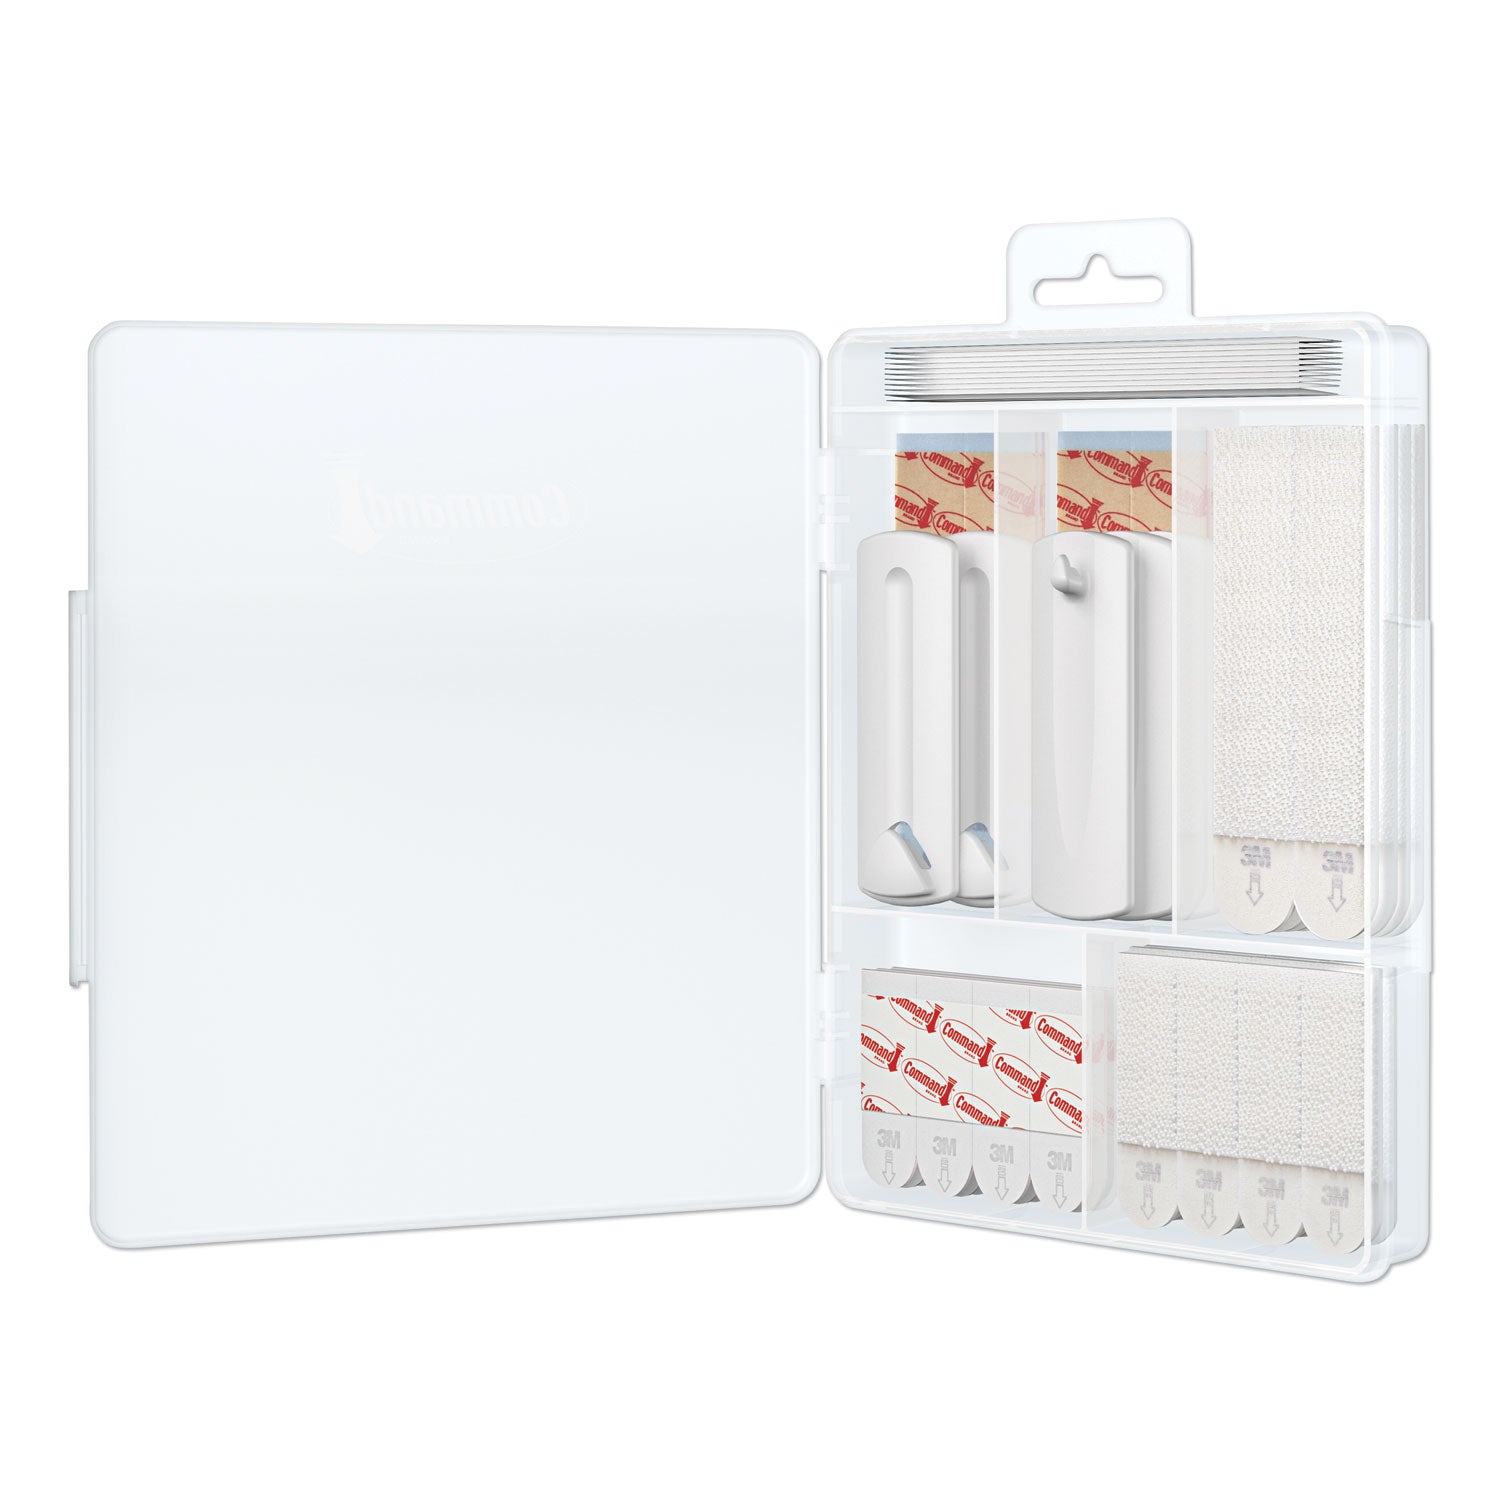 picture-hanging-kit-assorted-sizes-plastic-white-clear-1-lb;-4-lb;-5-lb-capacities-38-pieces-pack_mmm17213es - 3